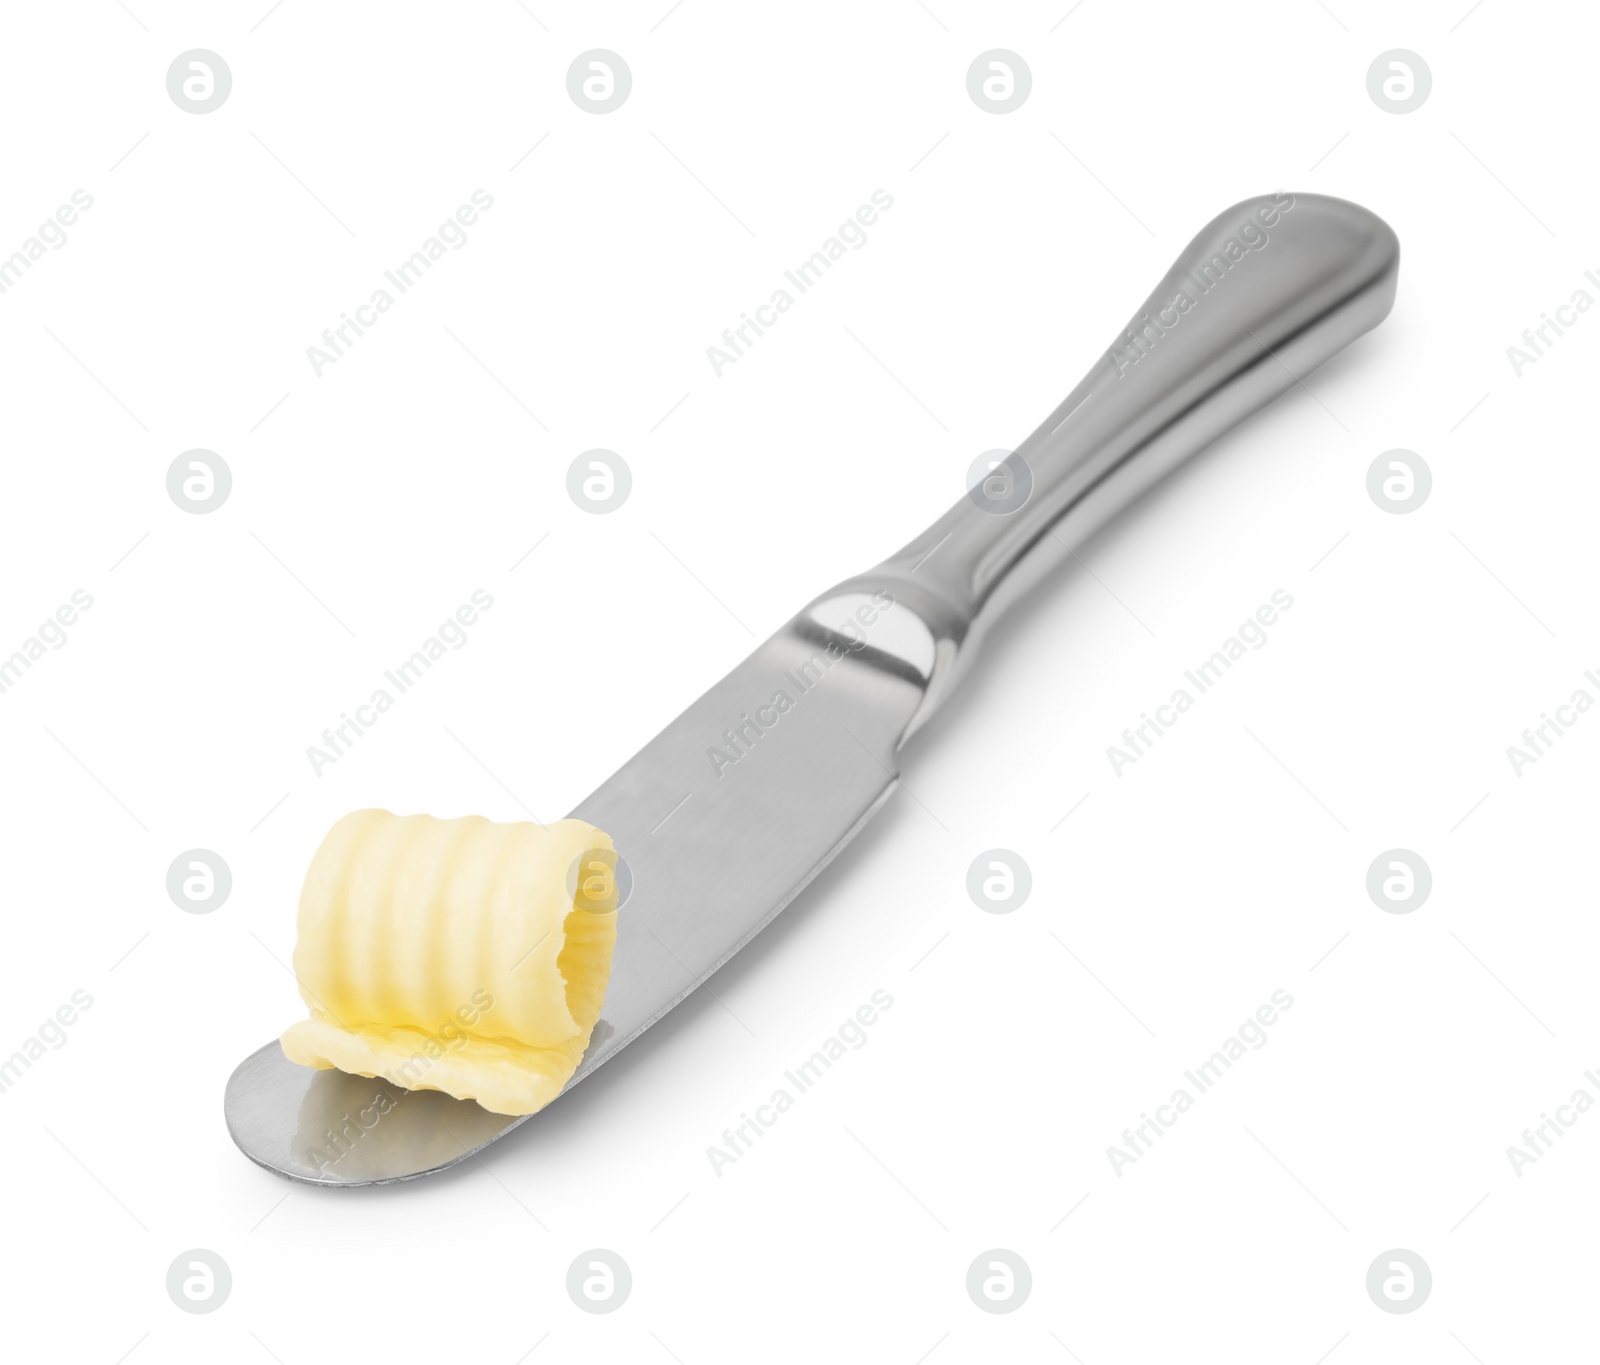 Photo of Butter curl and knife isolated on white